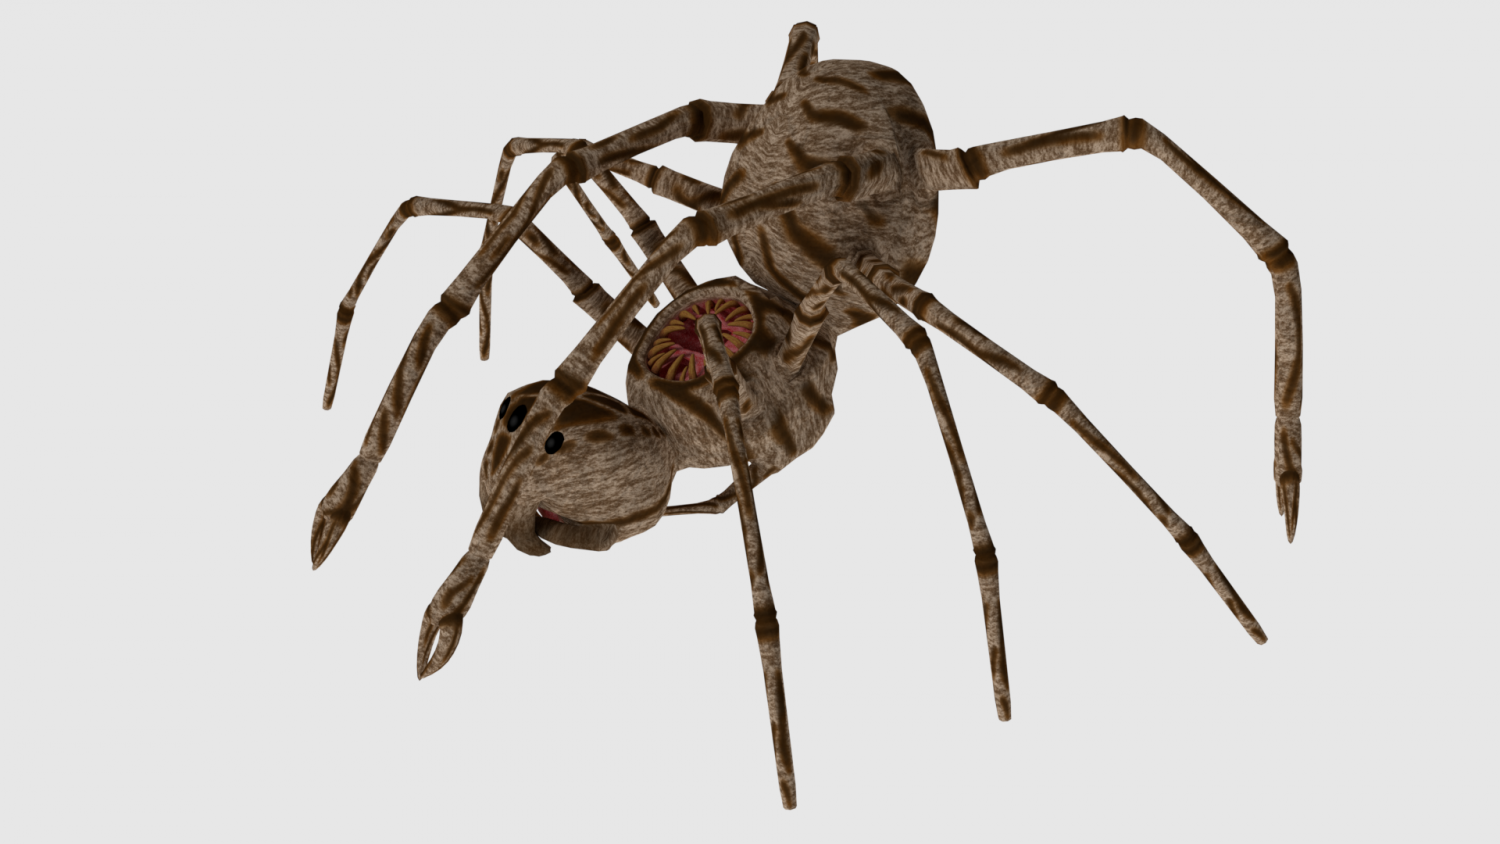 To continue... spider monster - game ready Model 3D. 